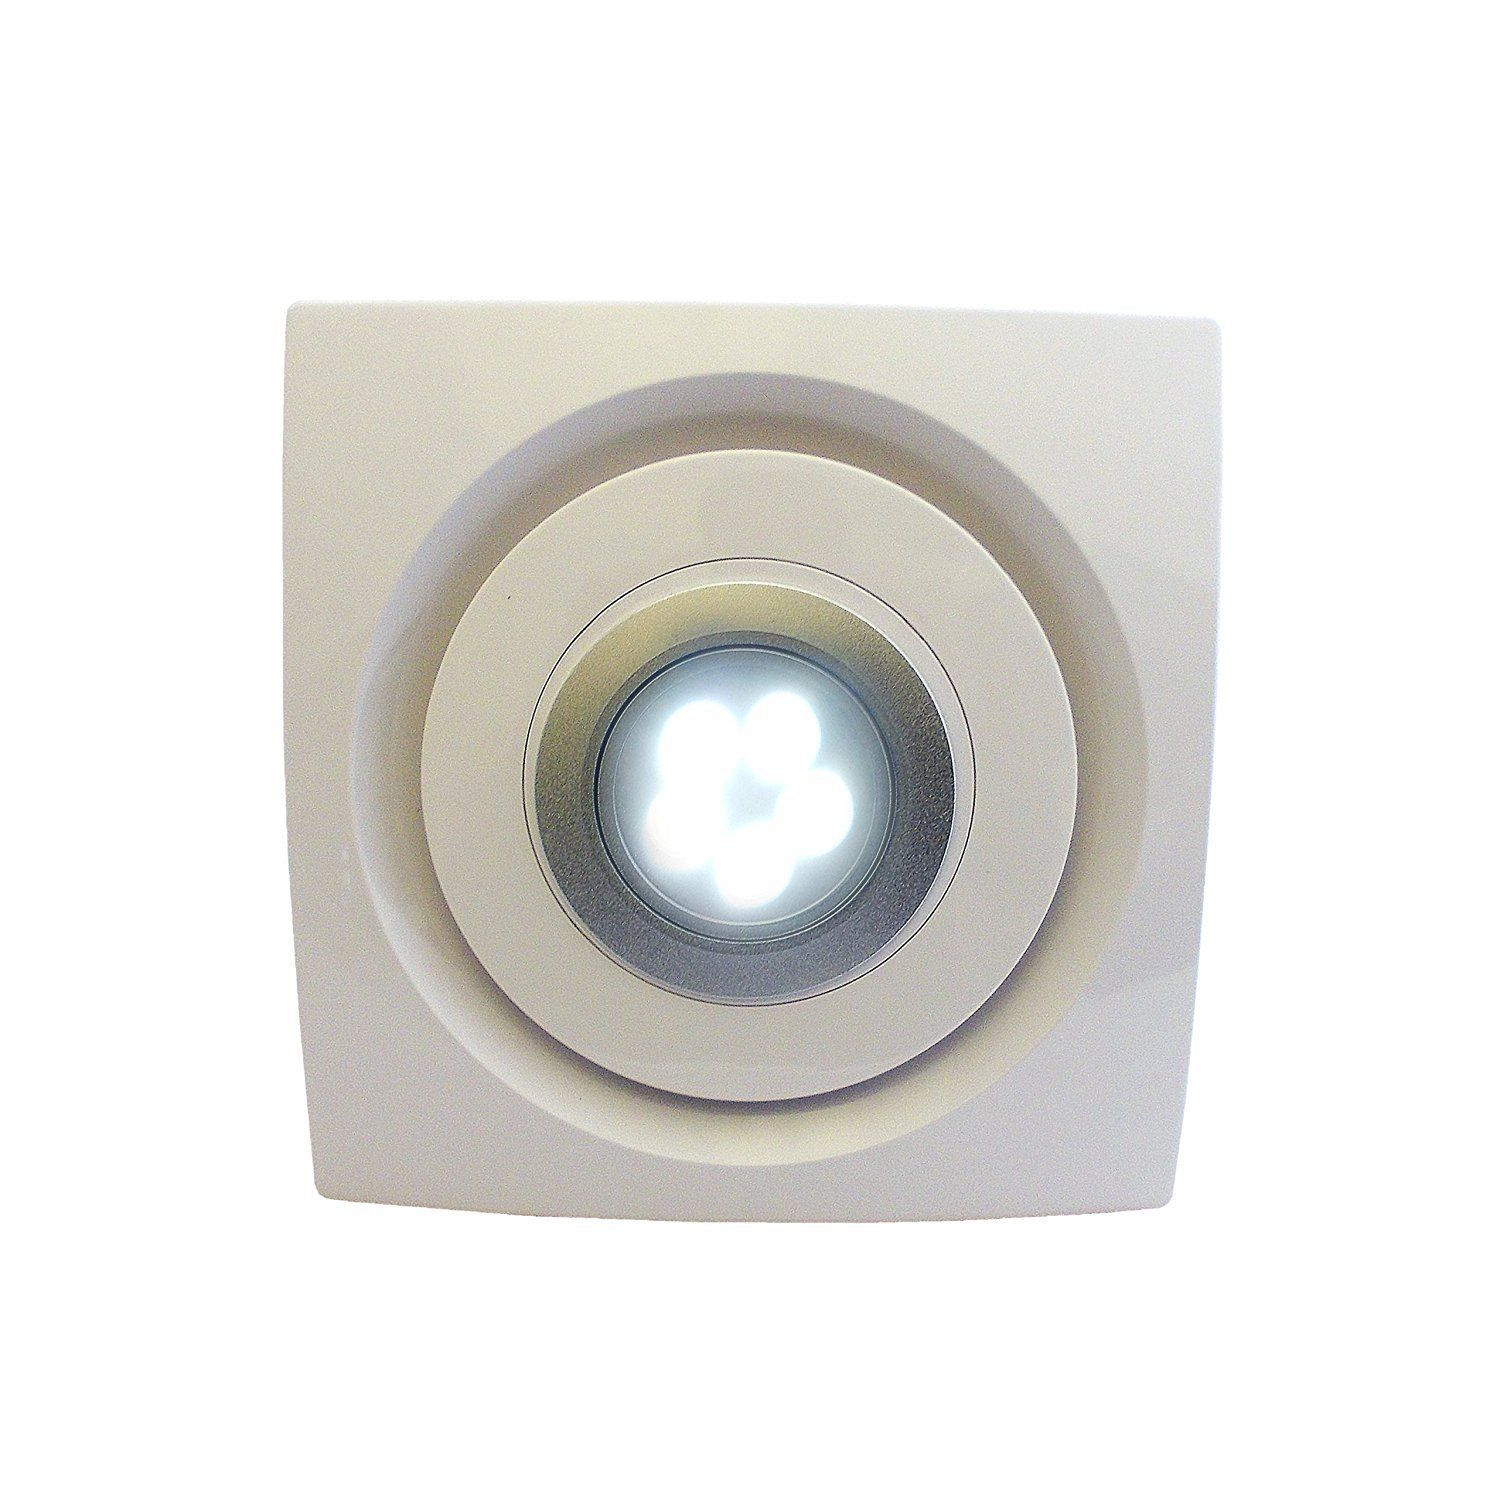 Bathroom Kitchen Ceiling Extractor Fan With Led Light 100mm 4 regarding measurements 1500 X 1500